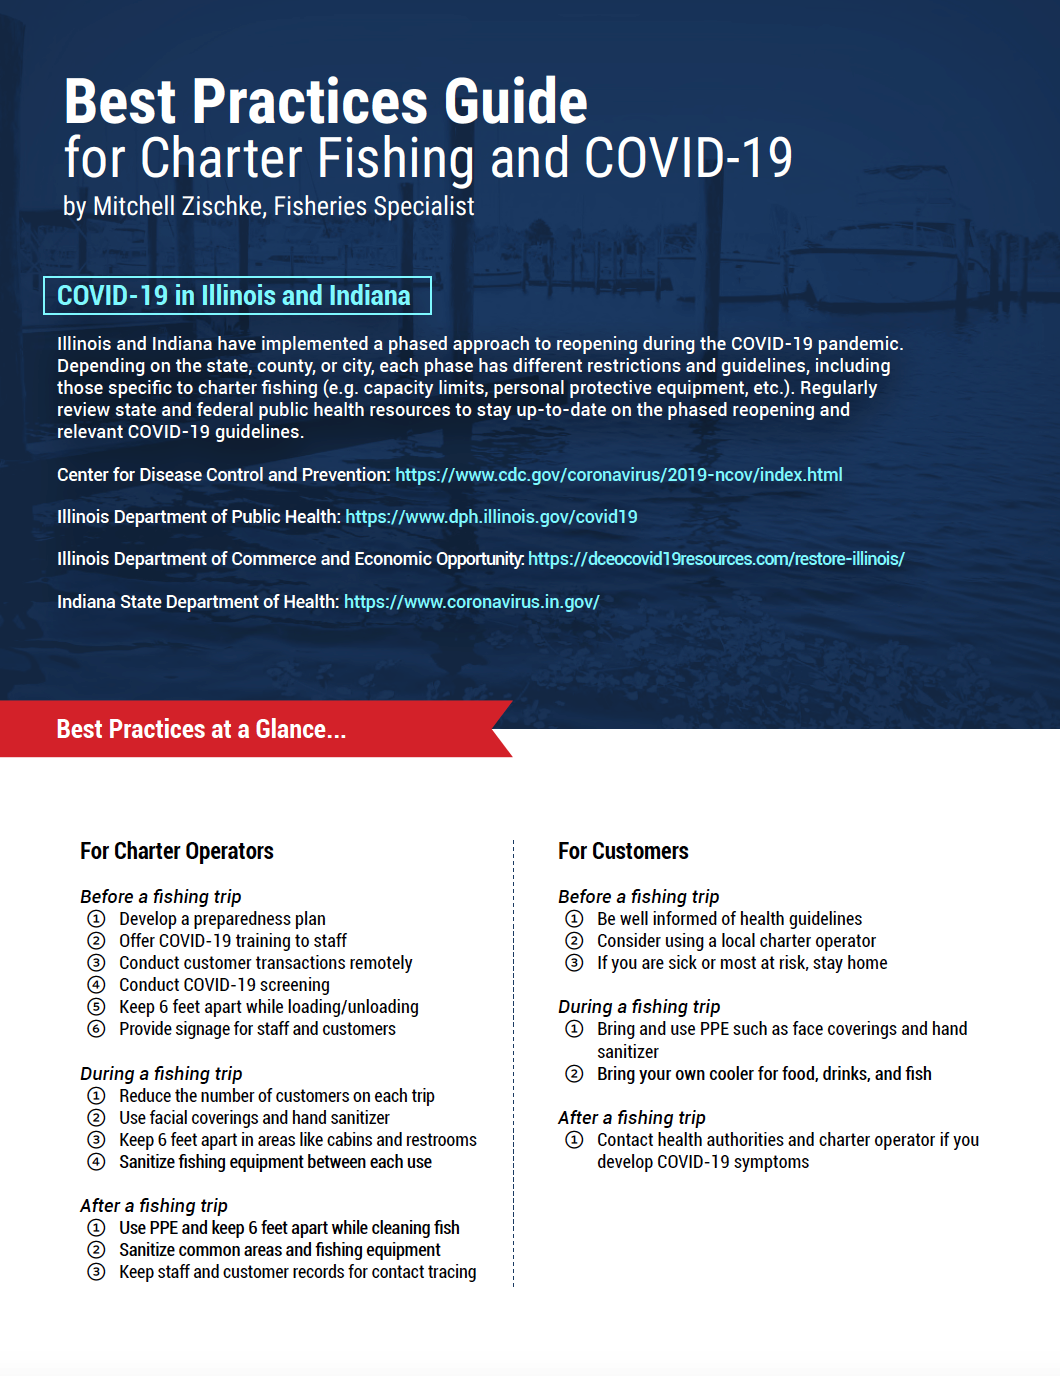 Best Practices Guide for Charter Fishing and COVID-19